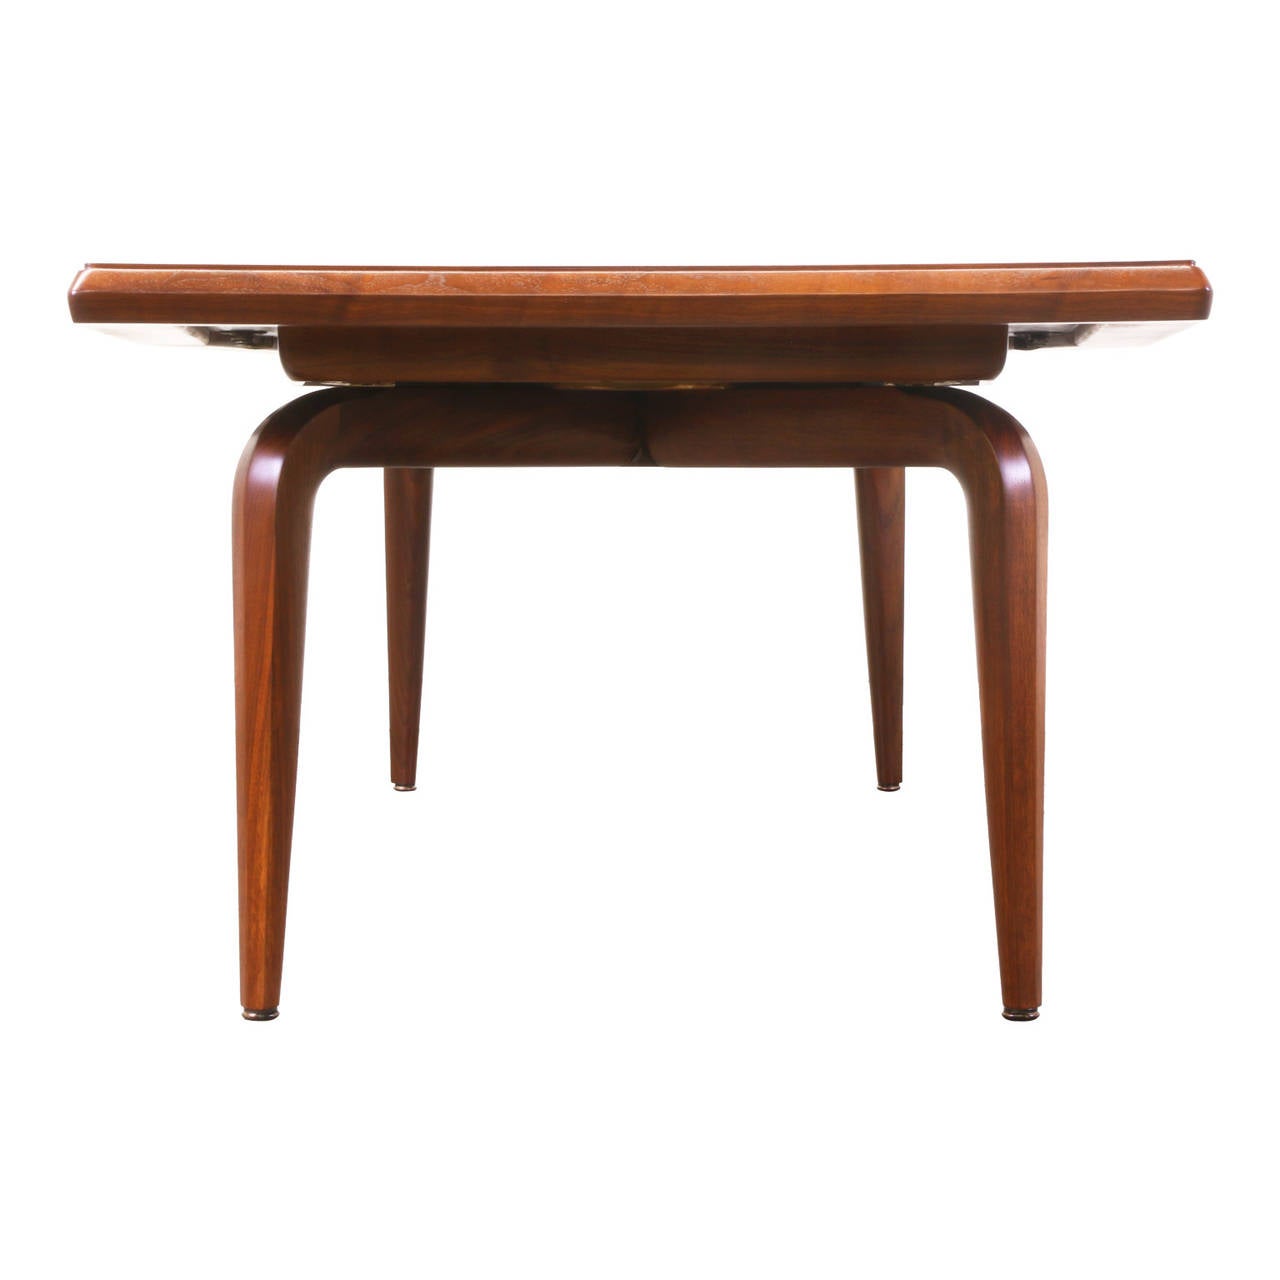 Walnut Maurice Bailey Monumental Sculptural Dining Table for Monteverdi-Young